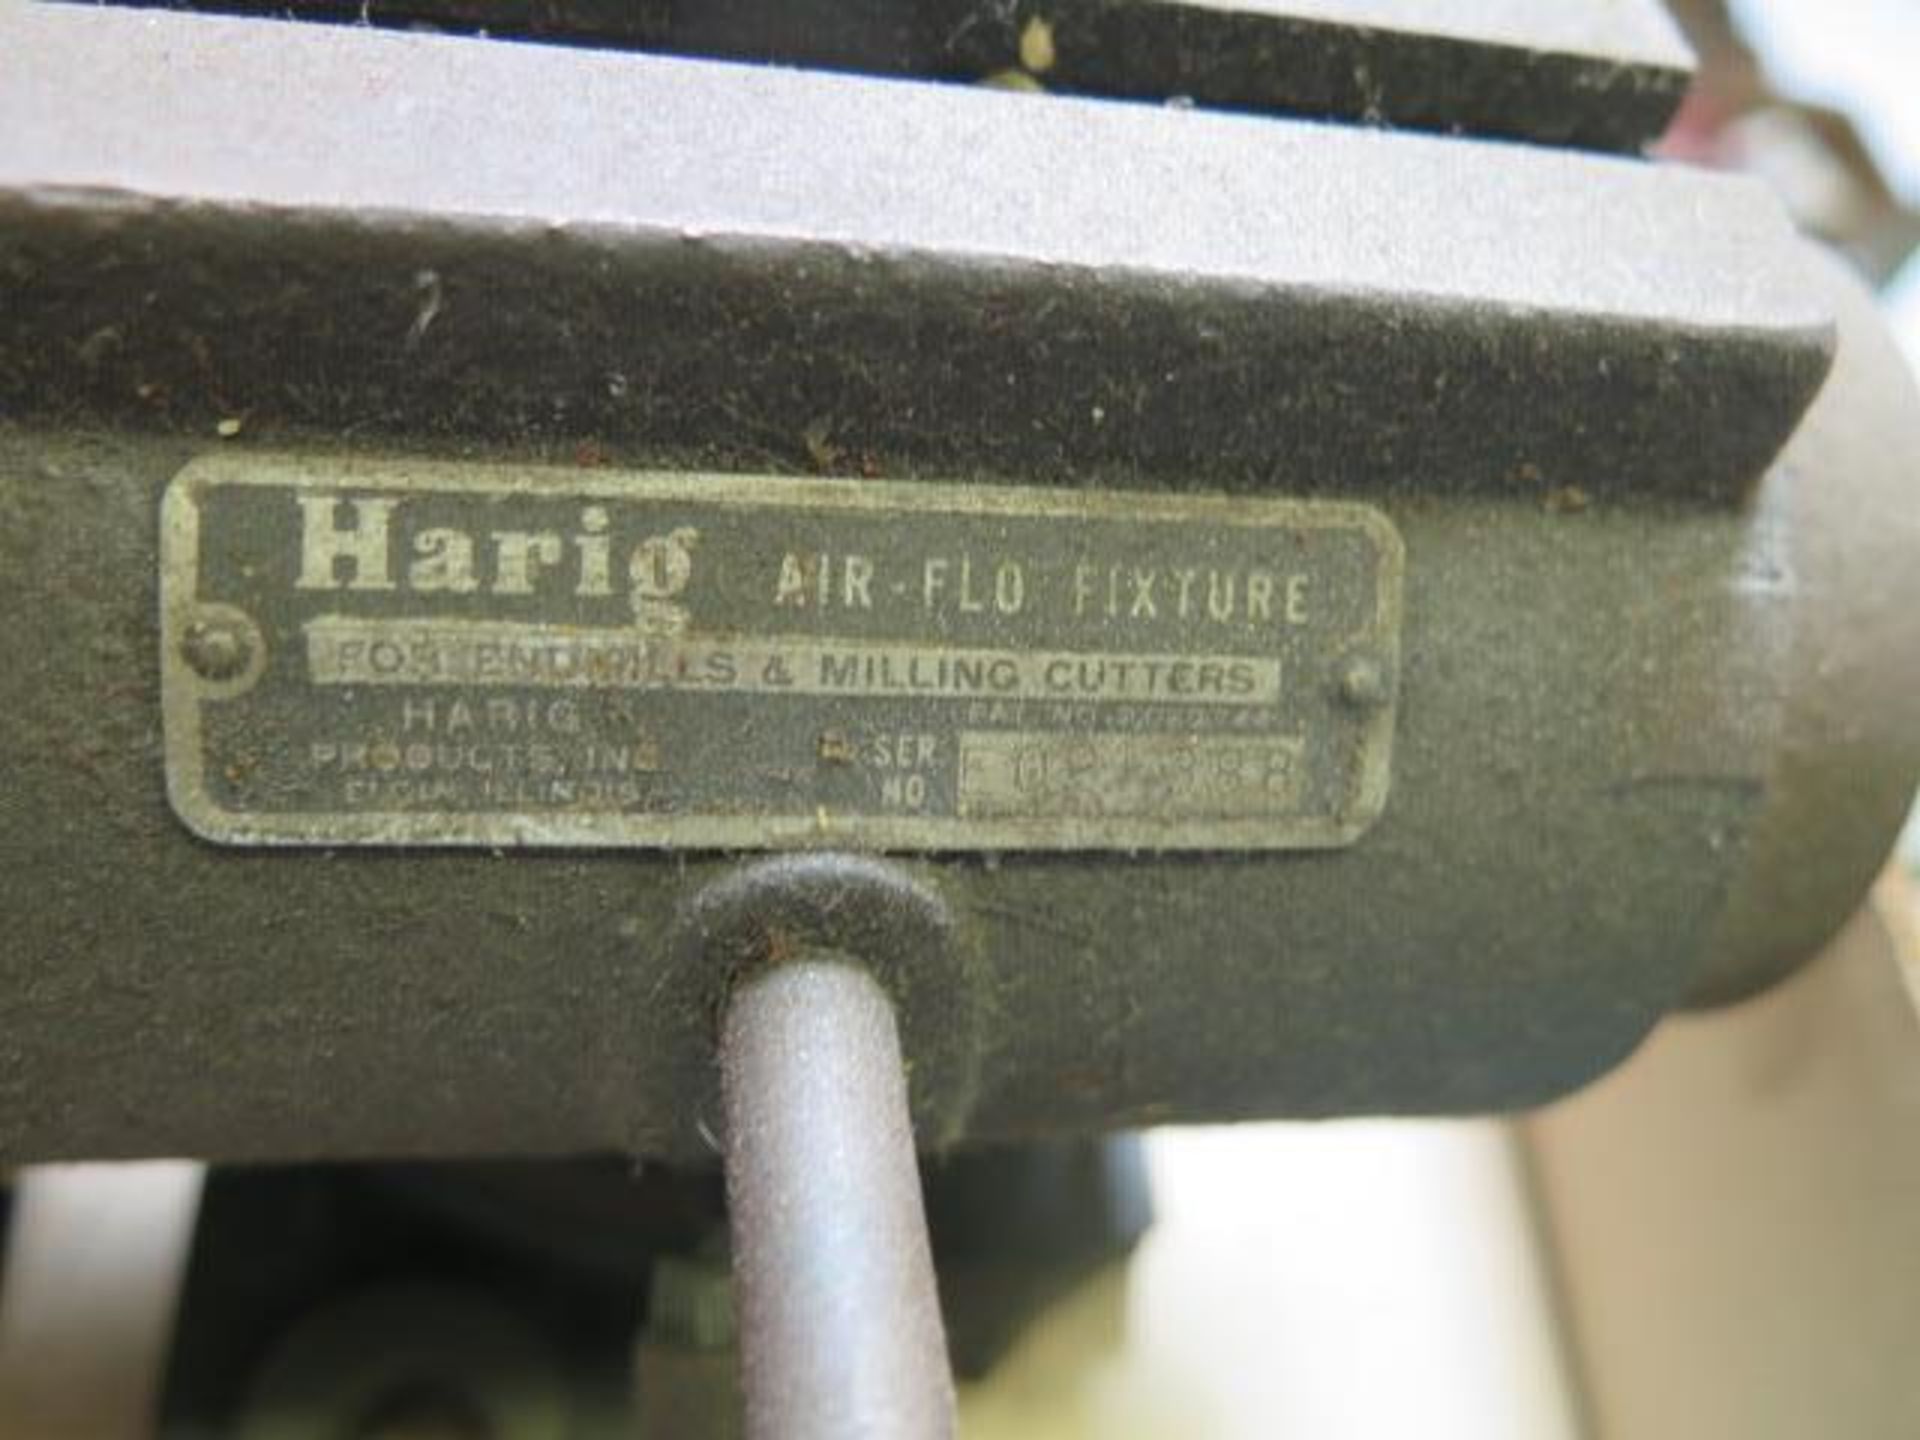 Harig 5C Endmill Sharpening Fixture (SOLD AS-IS - NO WARRANTY) - Image 5 of 5